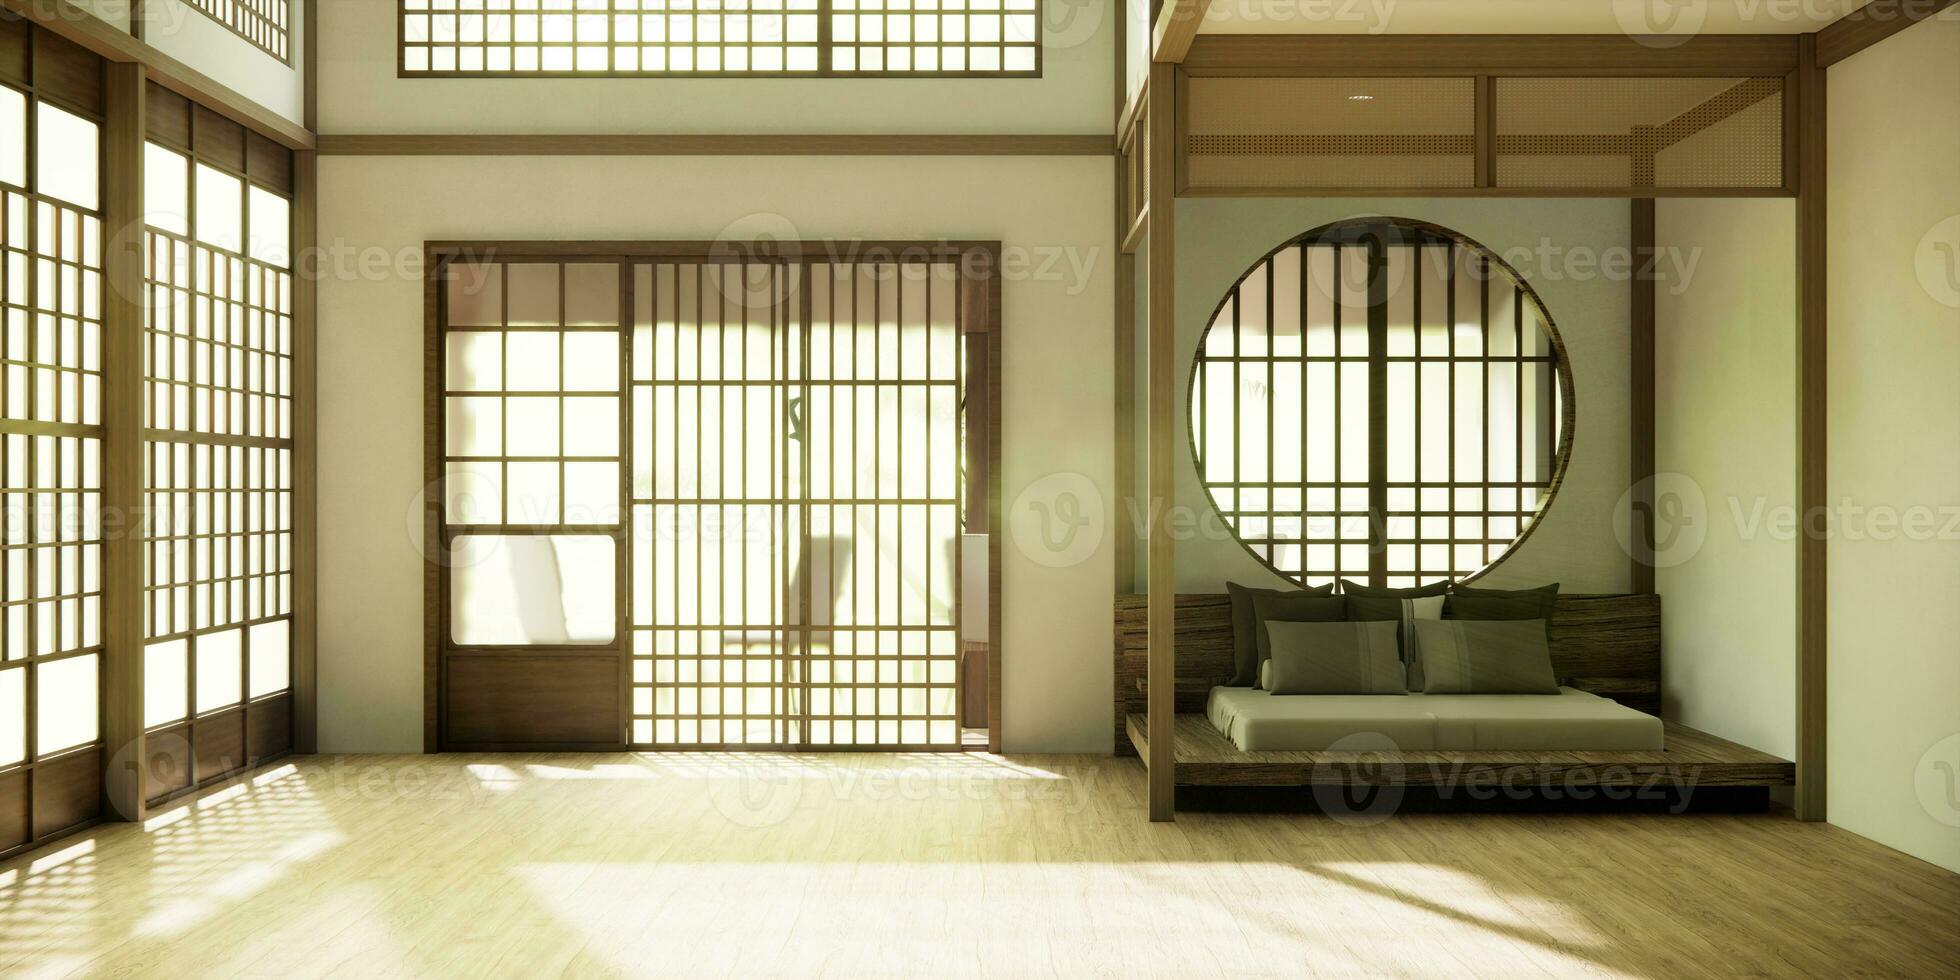 Japan style empty room decorated with wooden bed, white wall and wooden wall. photo